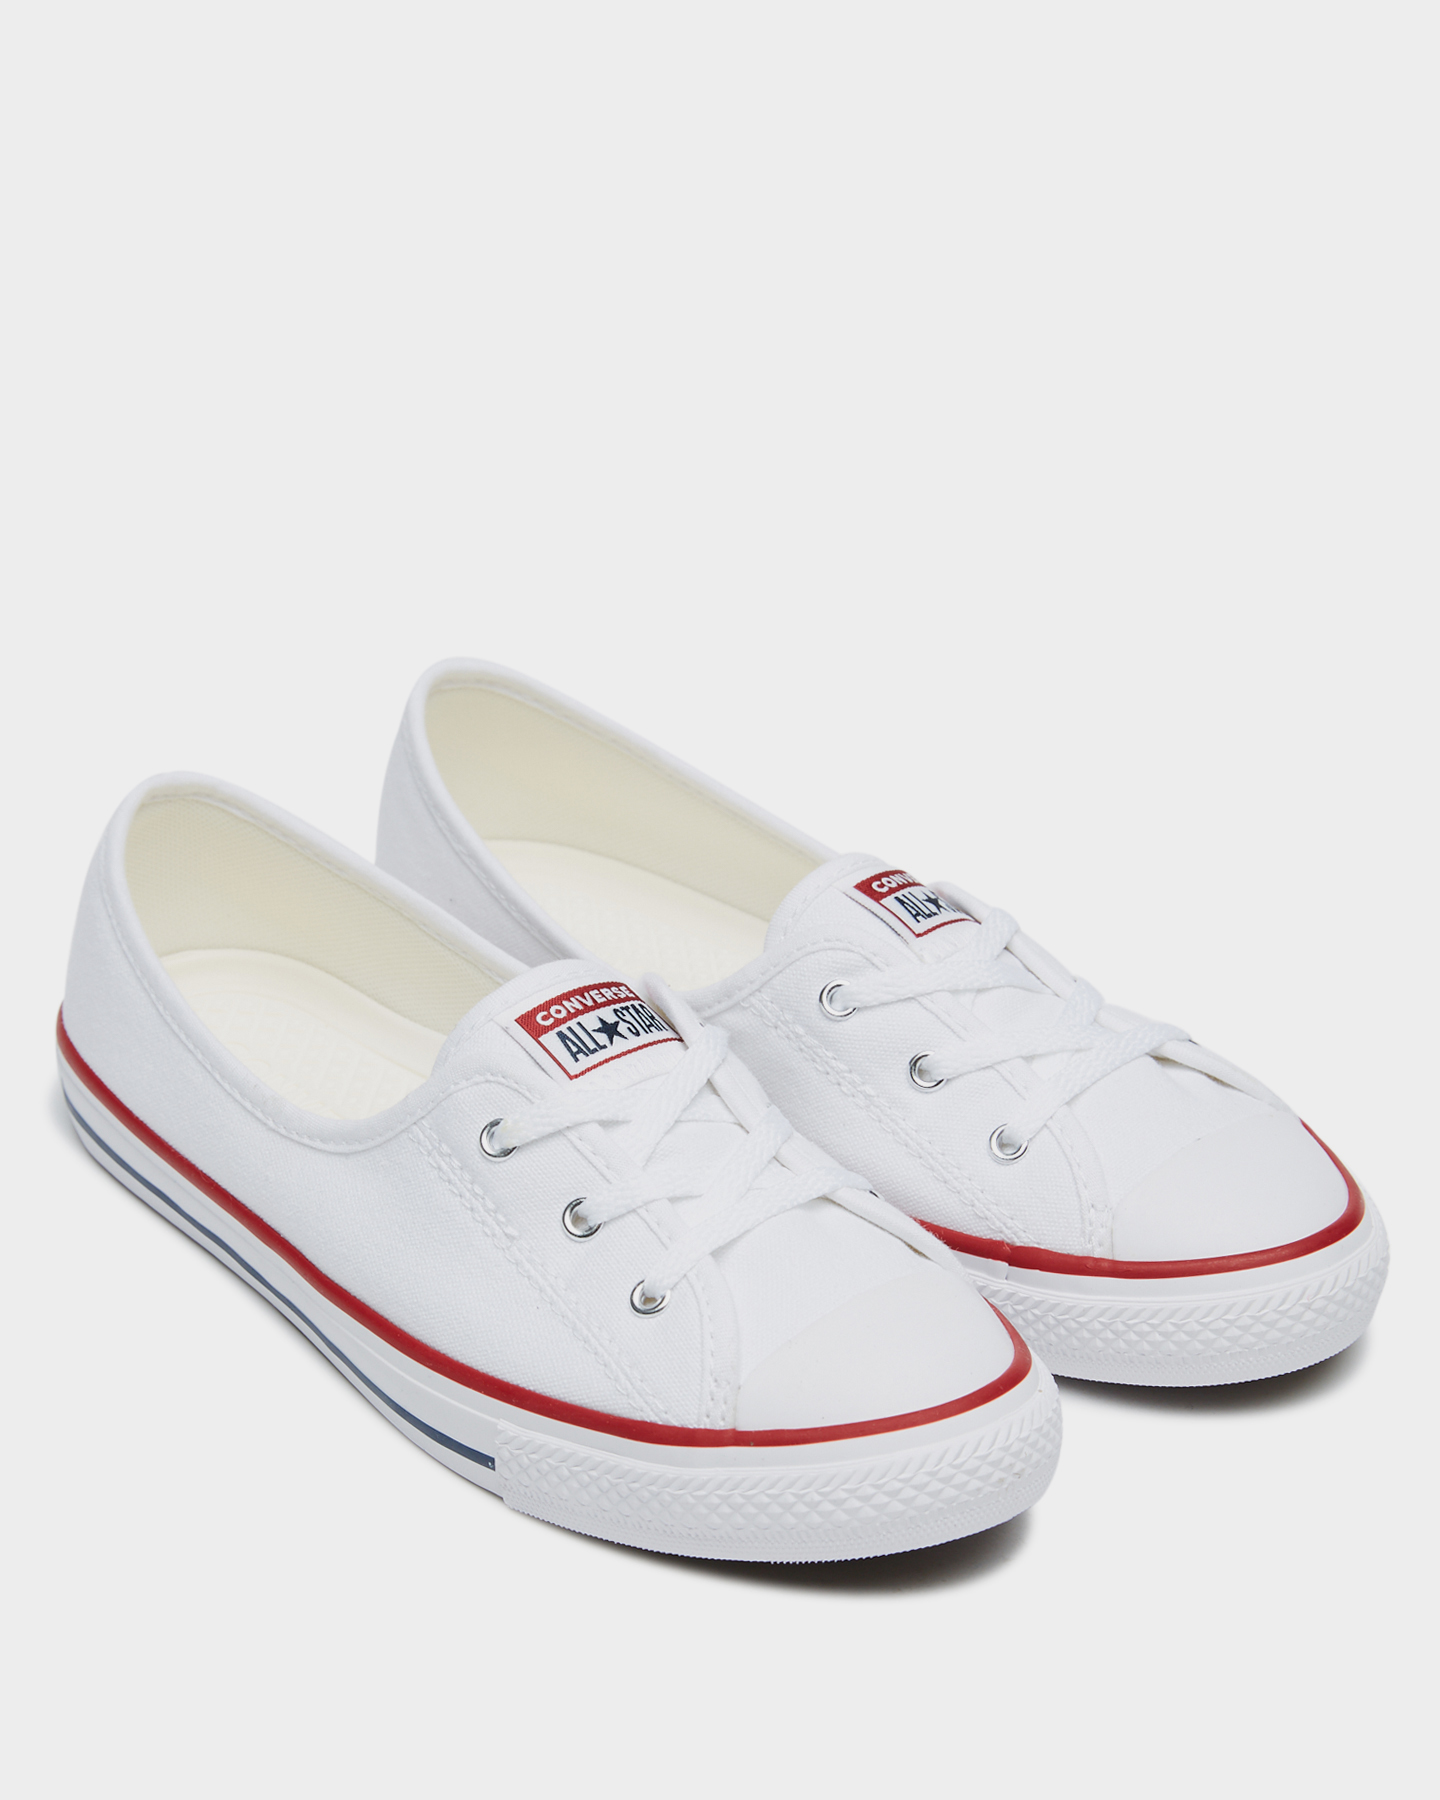 Converse Womens Taylor All Star Ballet Lace Shoe - SurfStitch